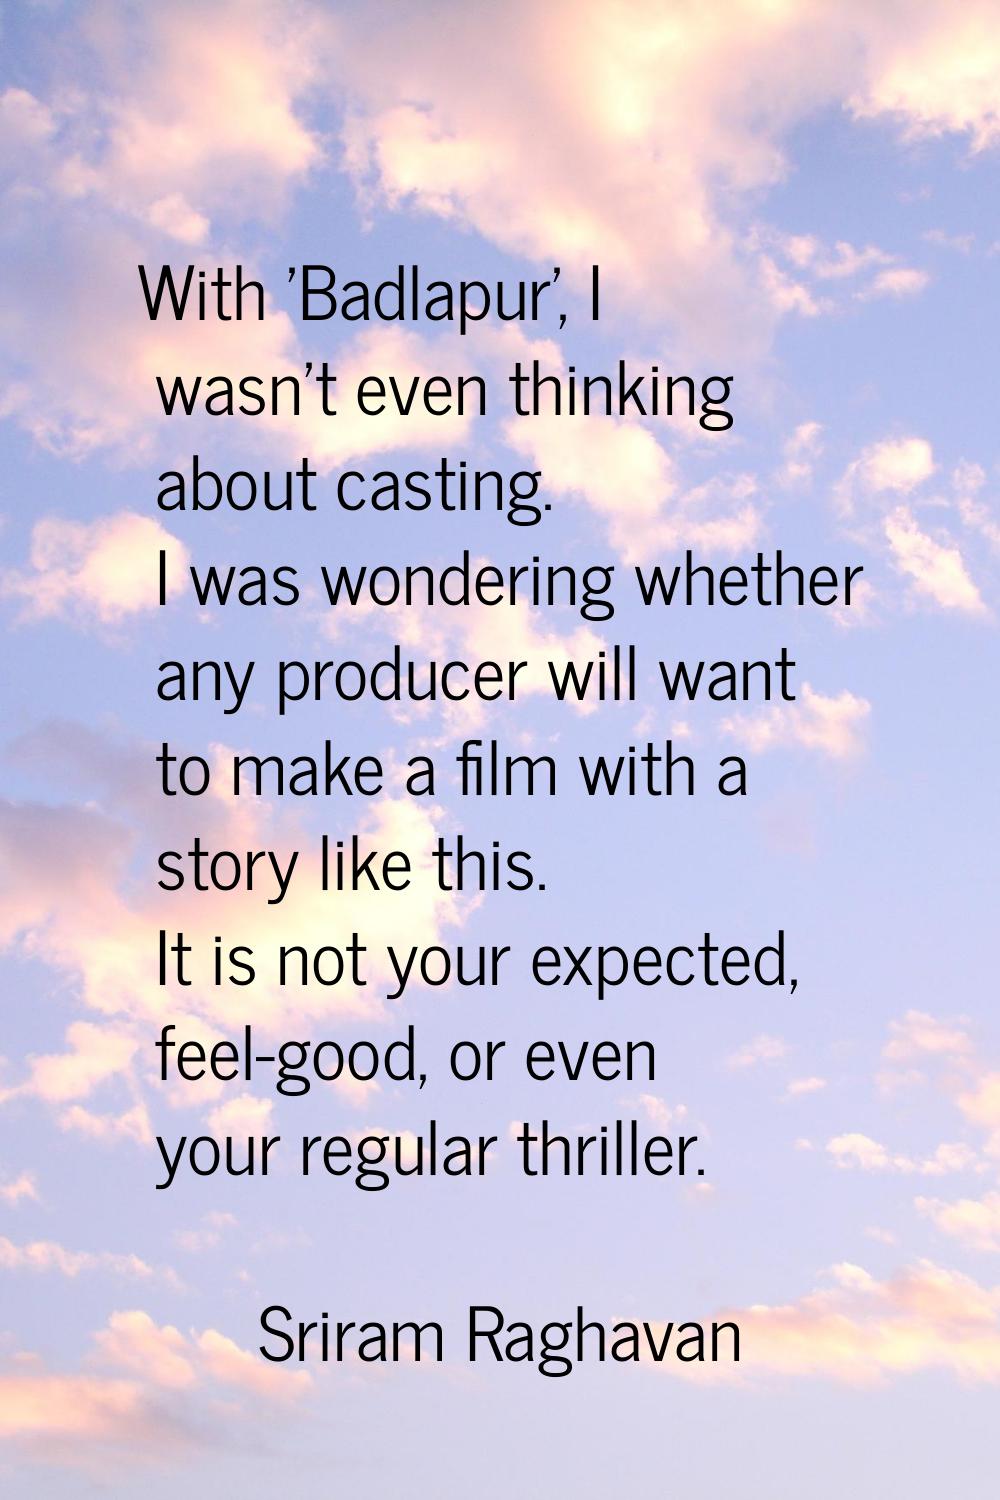 With 'Badlapur', I wasn’t even thinking about casting. I was wondering whether any producer will wa